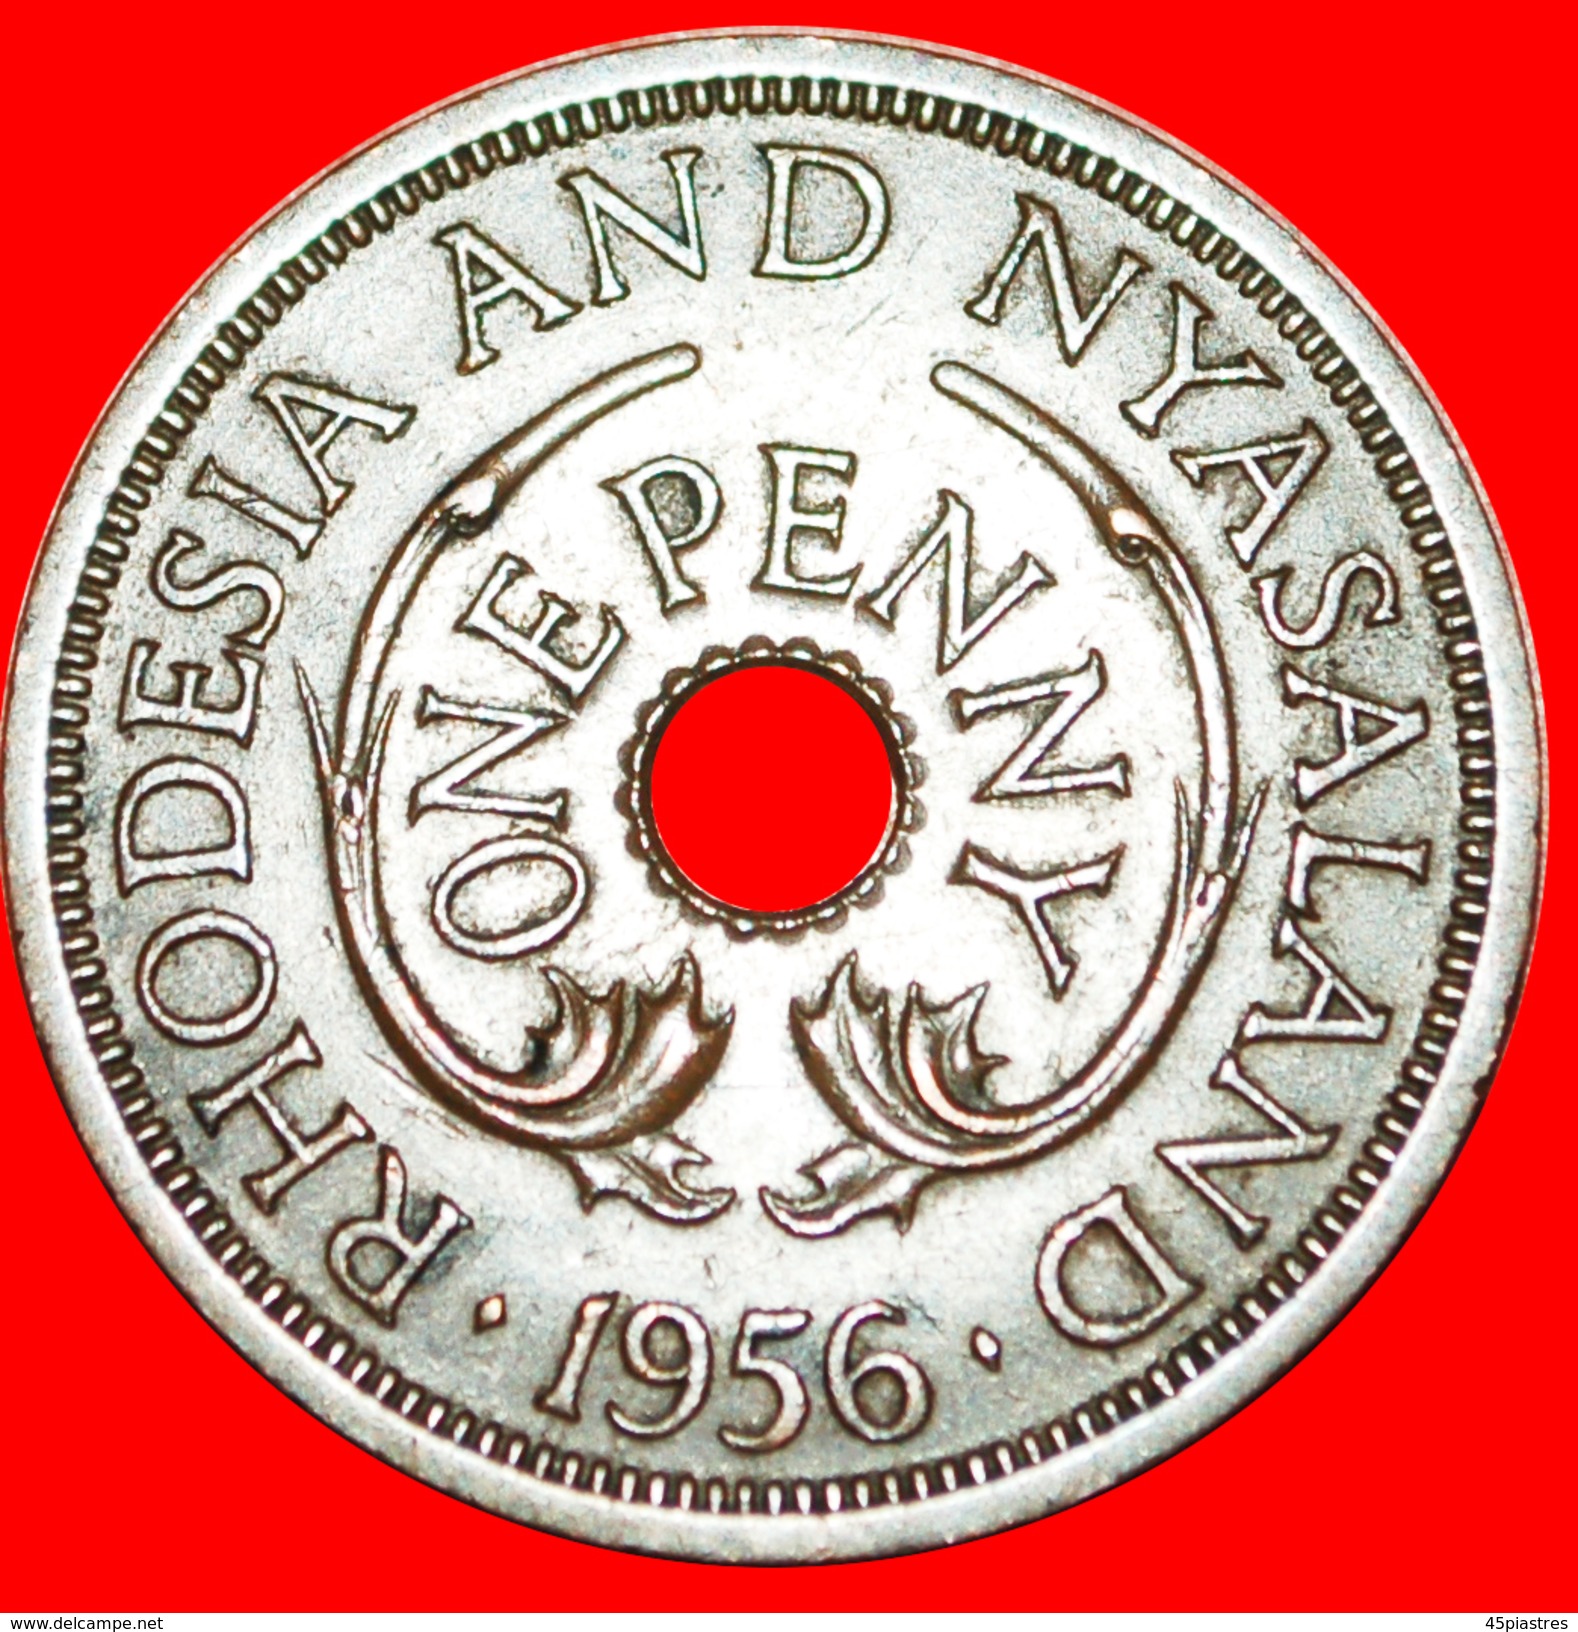 § HOLE: SOUTHERN RHODESIA &#x2605; 1 PENNY 1951!LOW START&#x2605; NO RESERVE! George VI (1937-1952) - Rhodesia